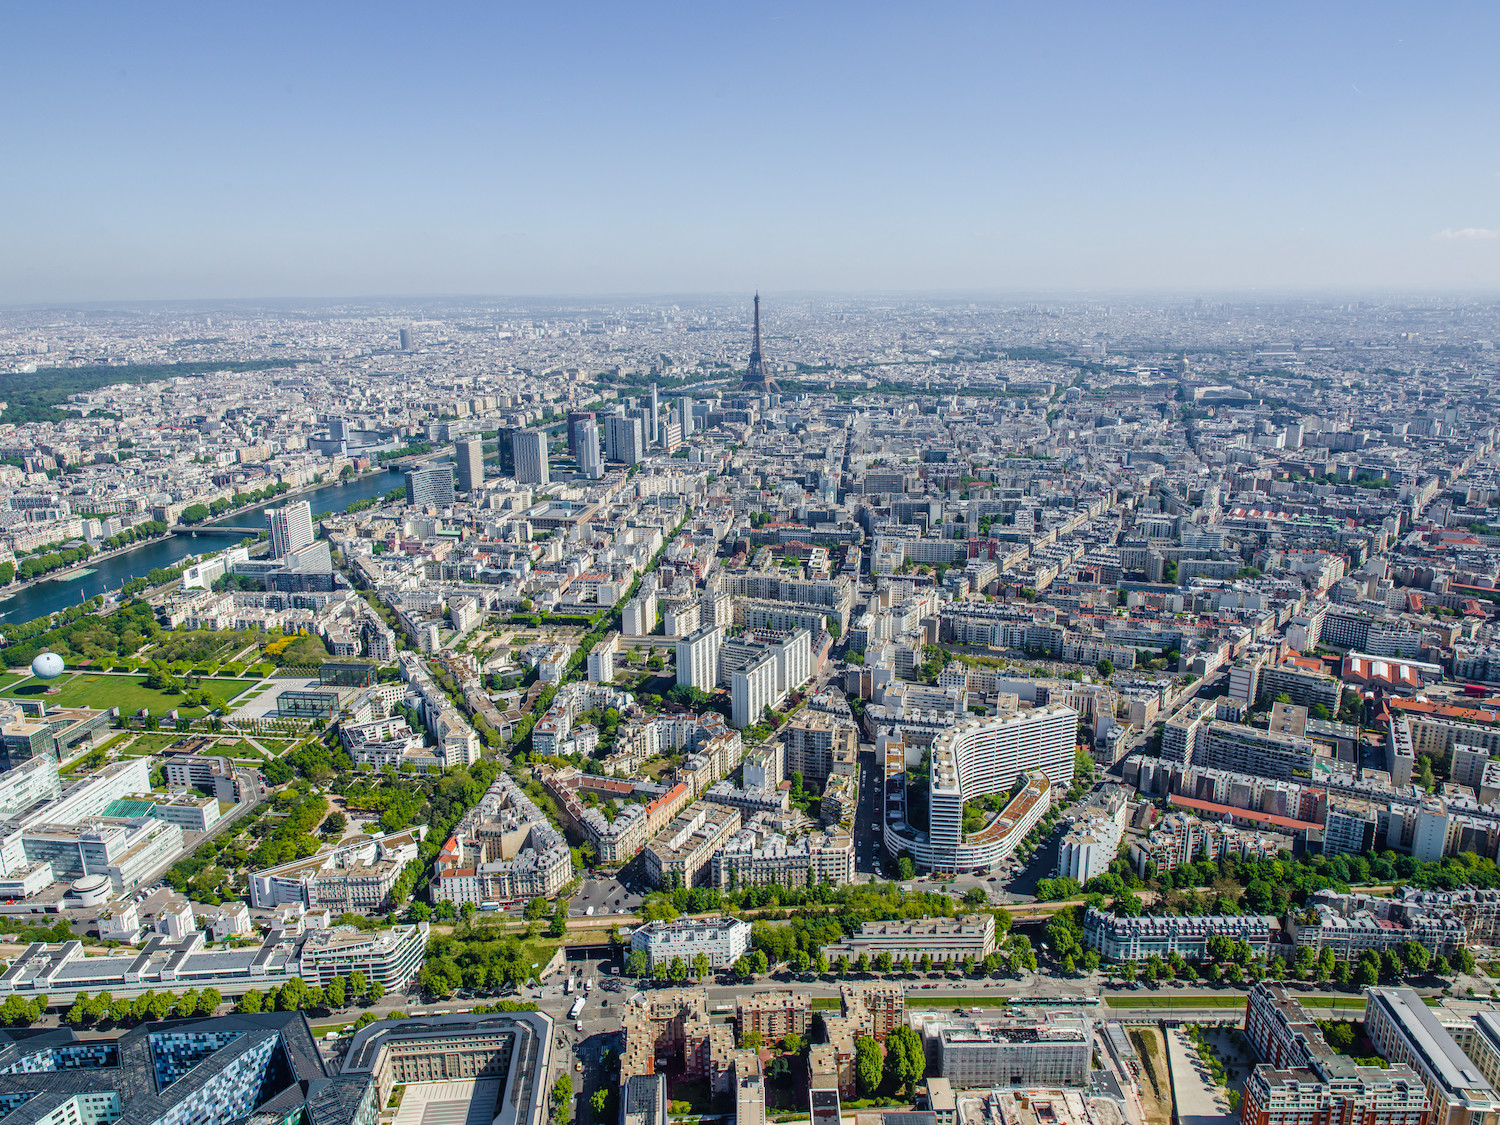 15-minute city infrastructure in Paris, France.